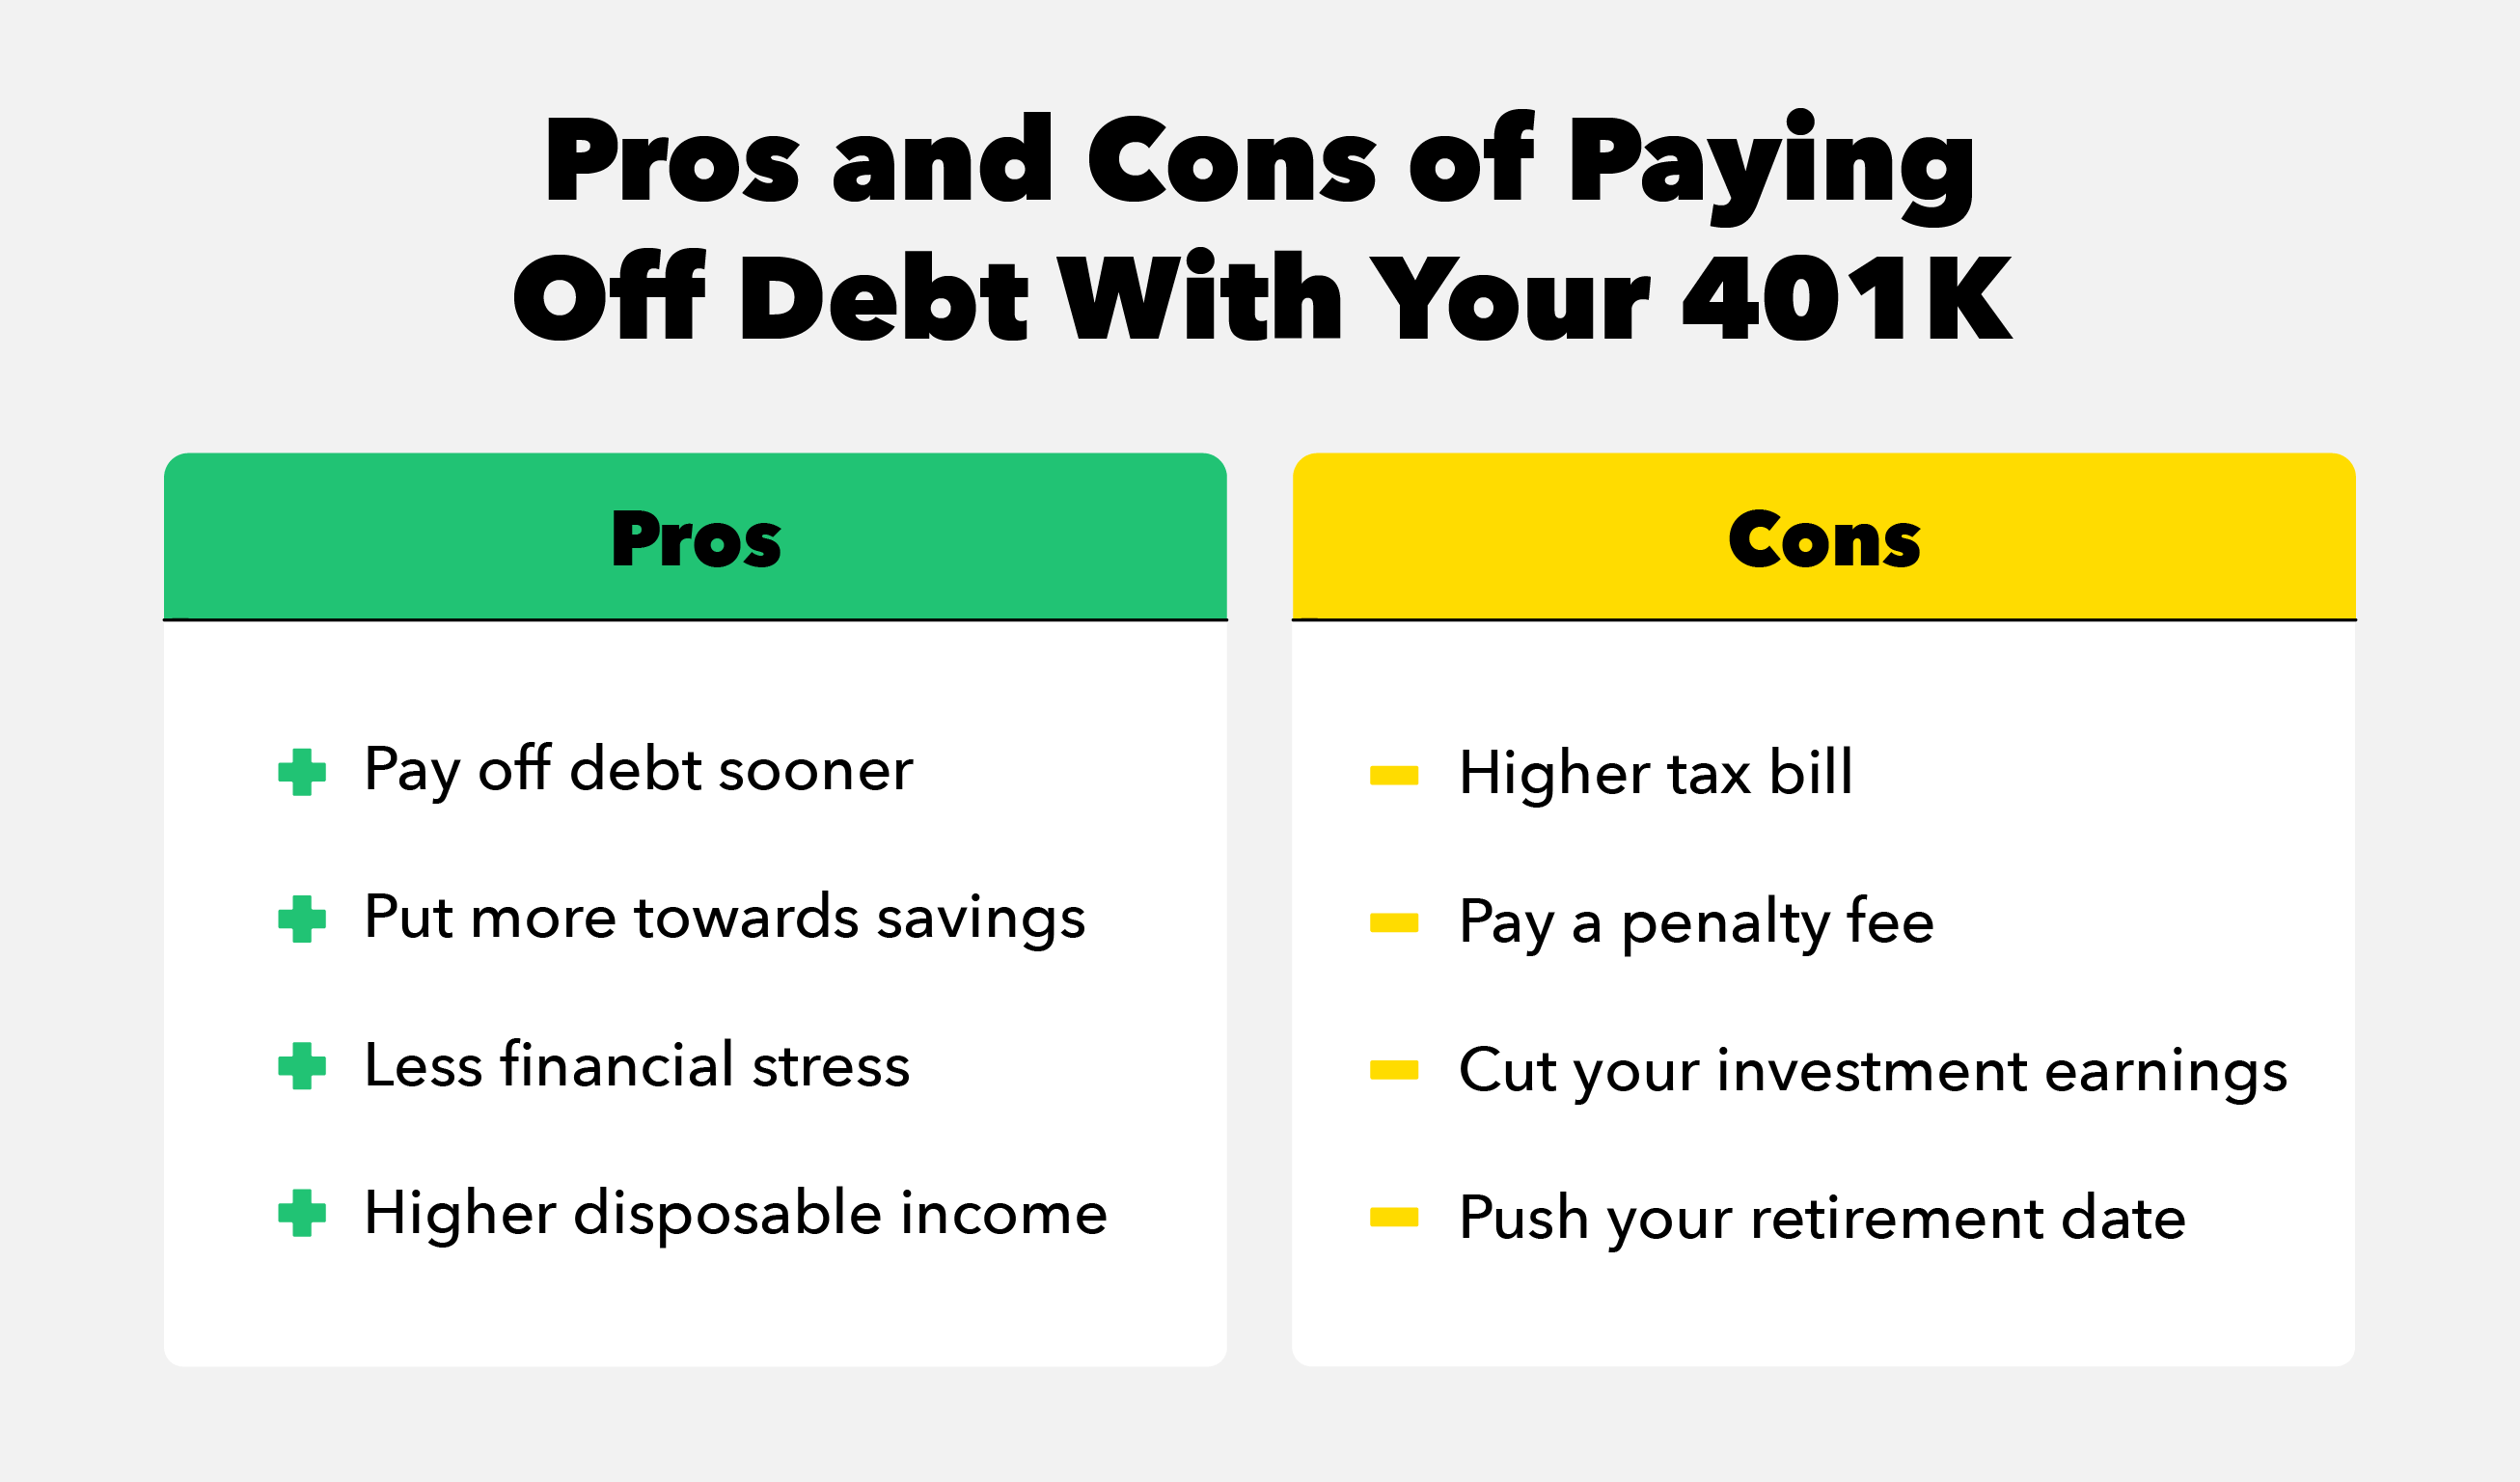 What Are the Pros and Cons?